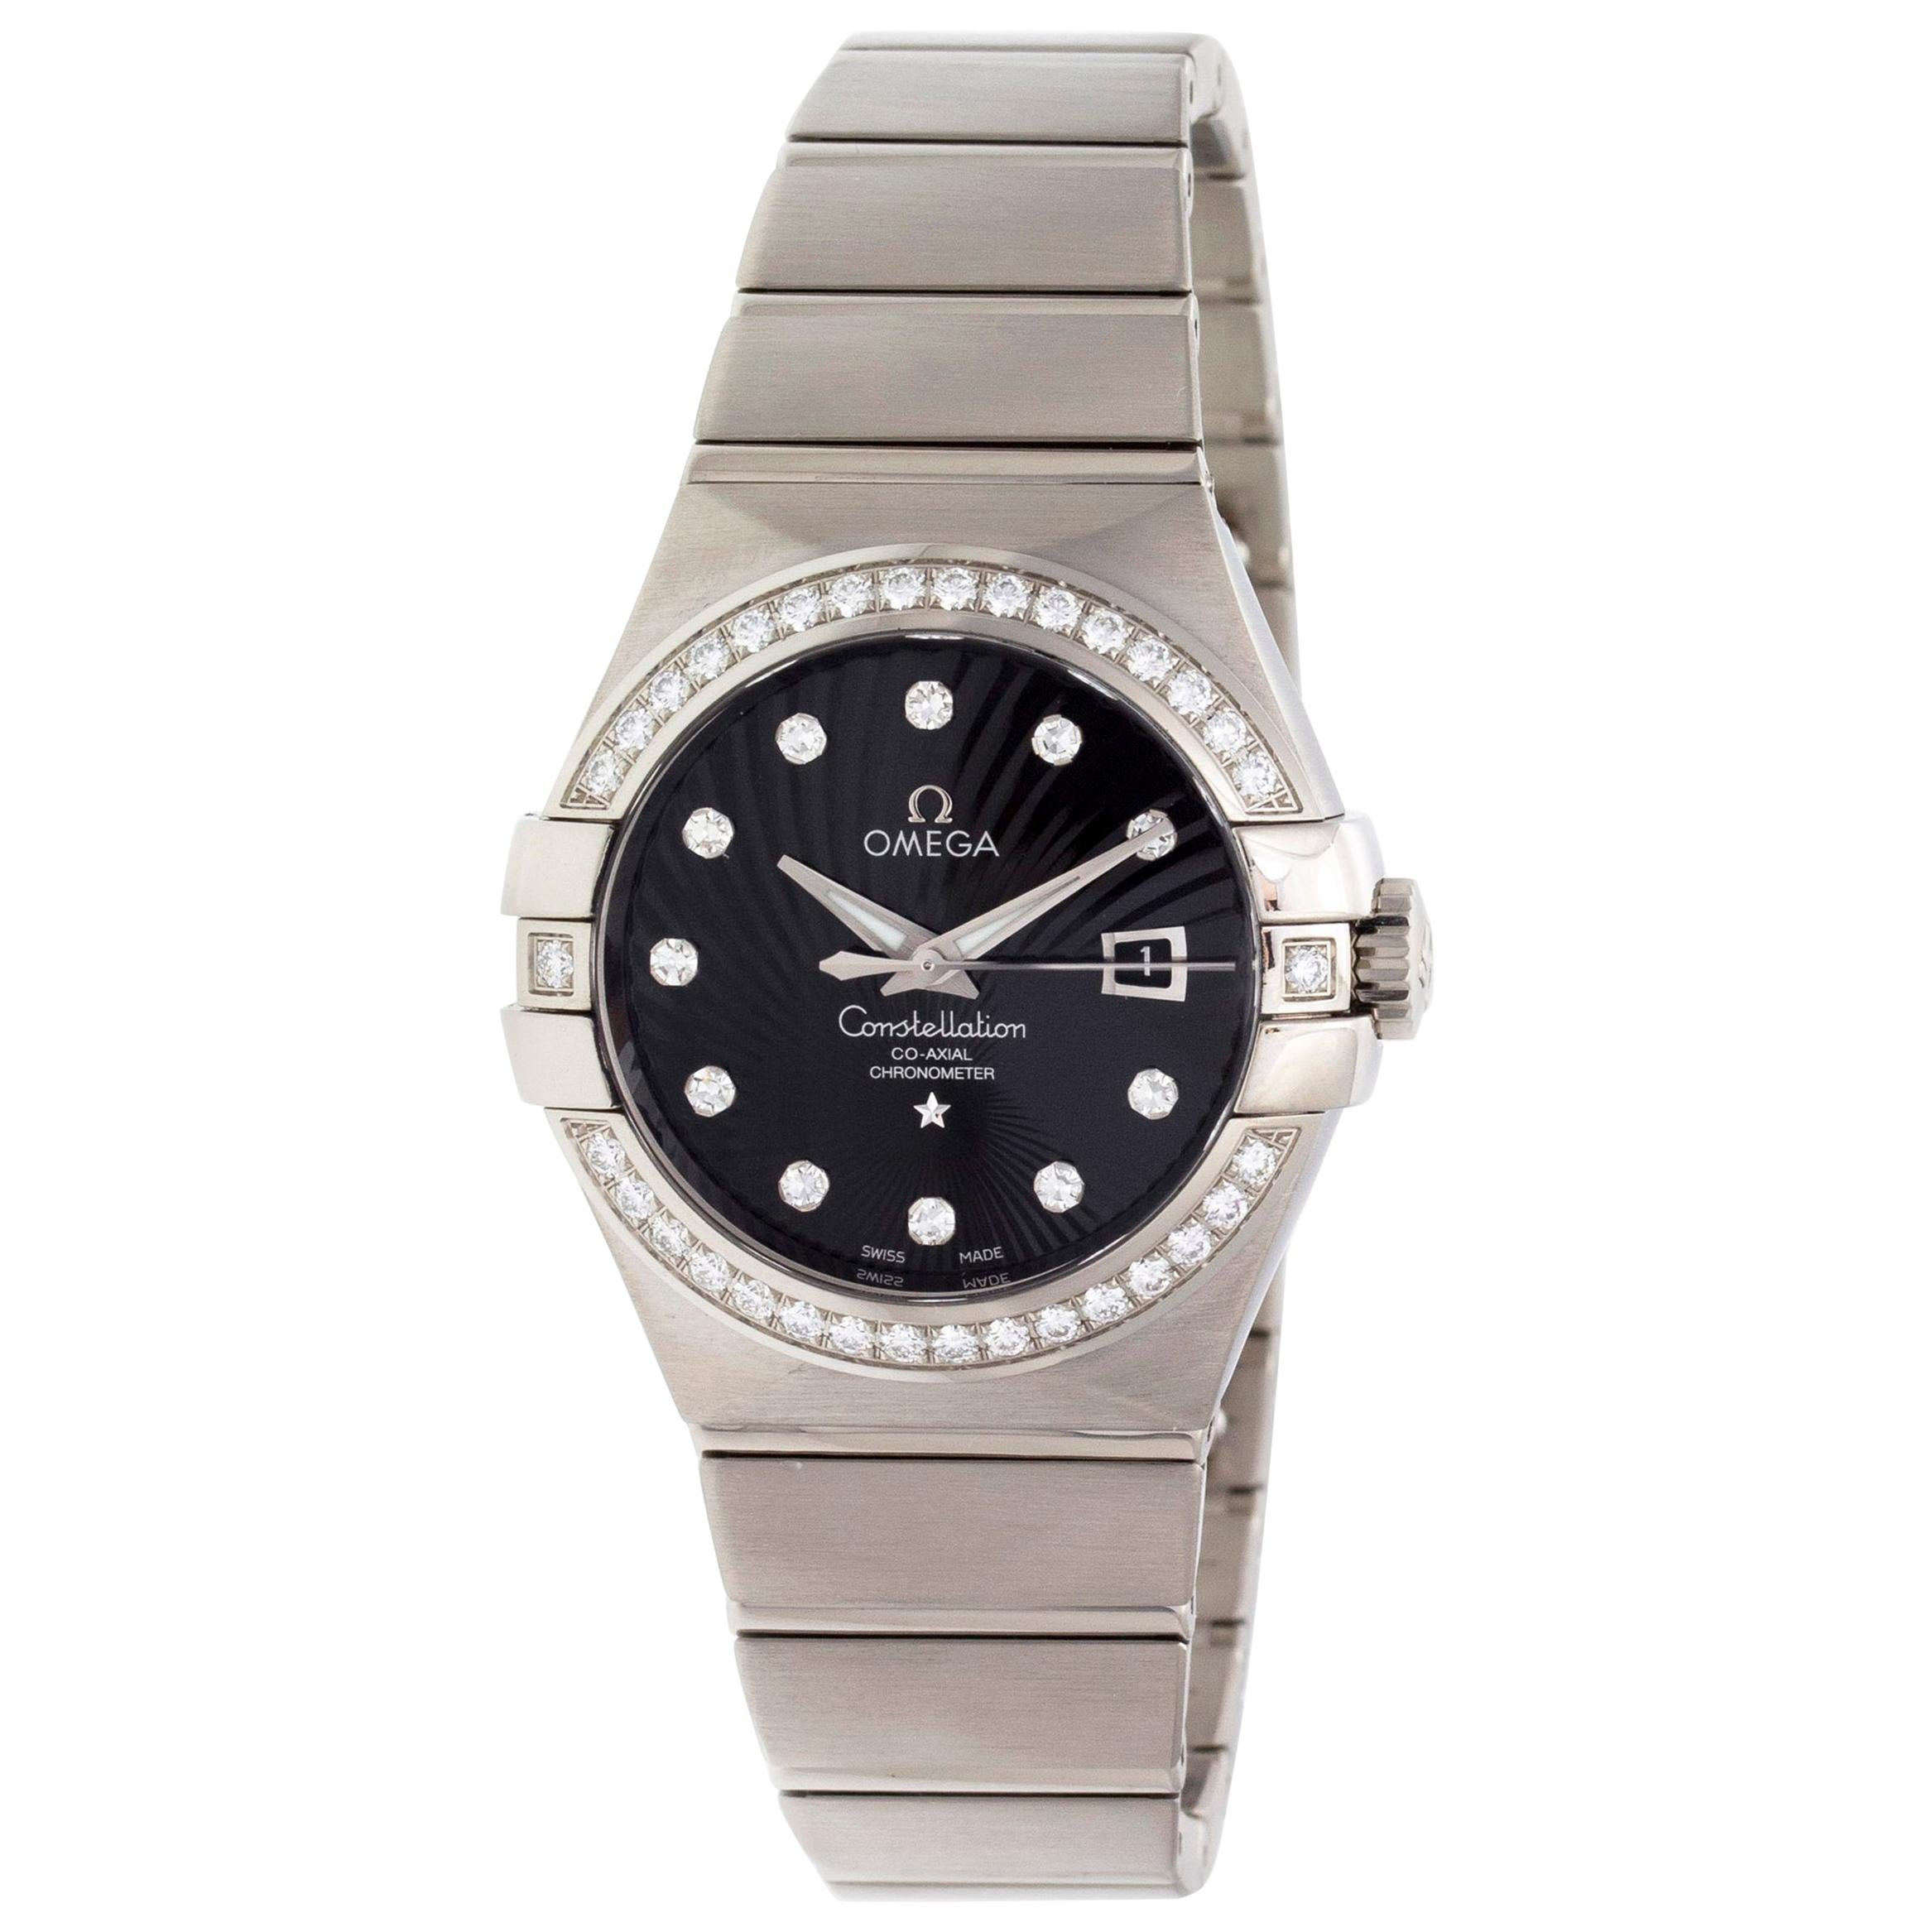 Omega Constellation 123.55.31.20.51.001 For Sale